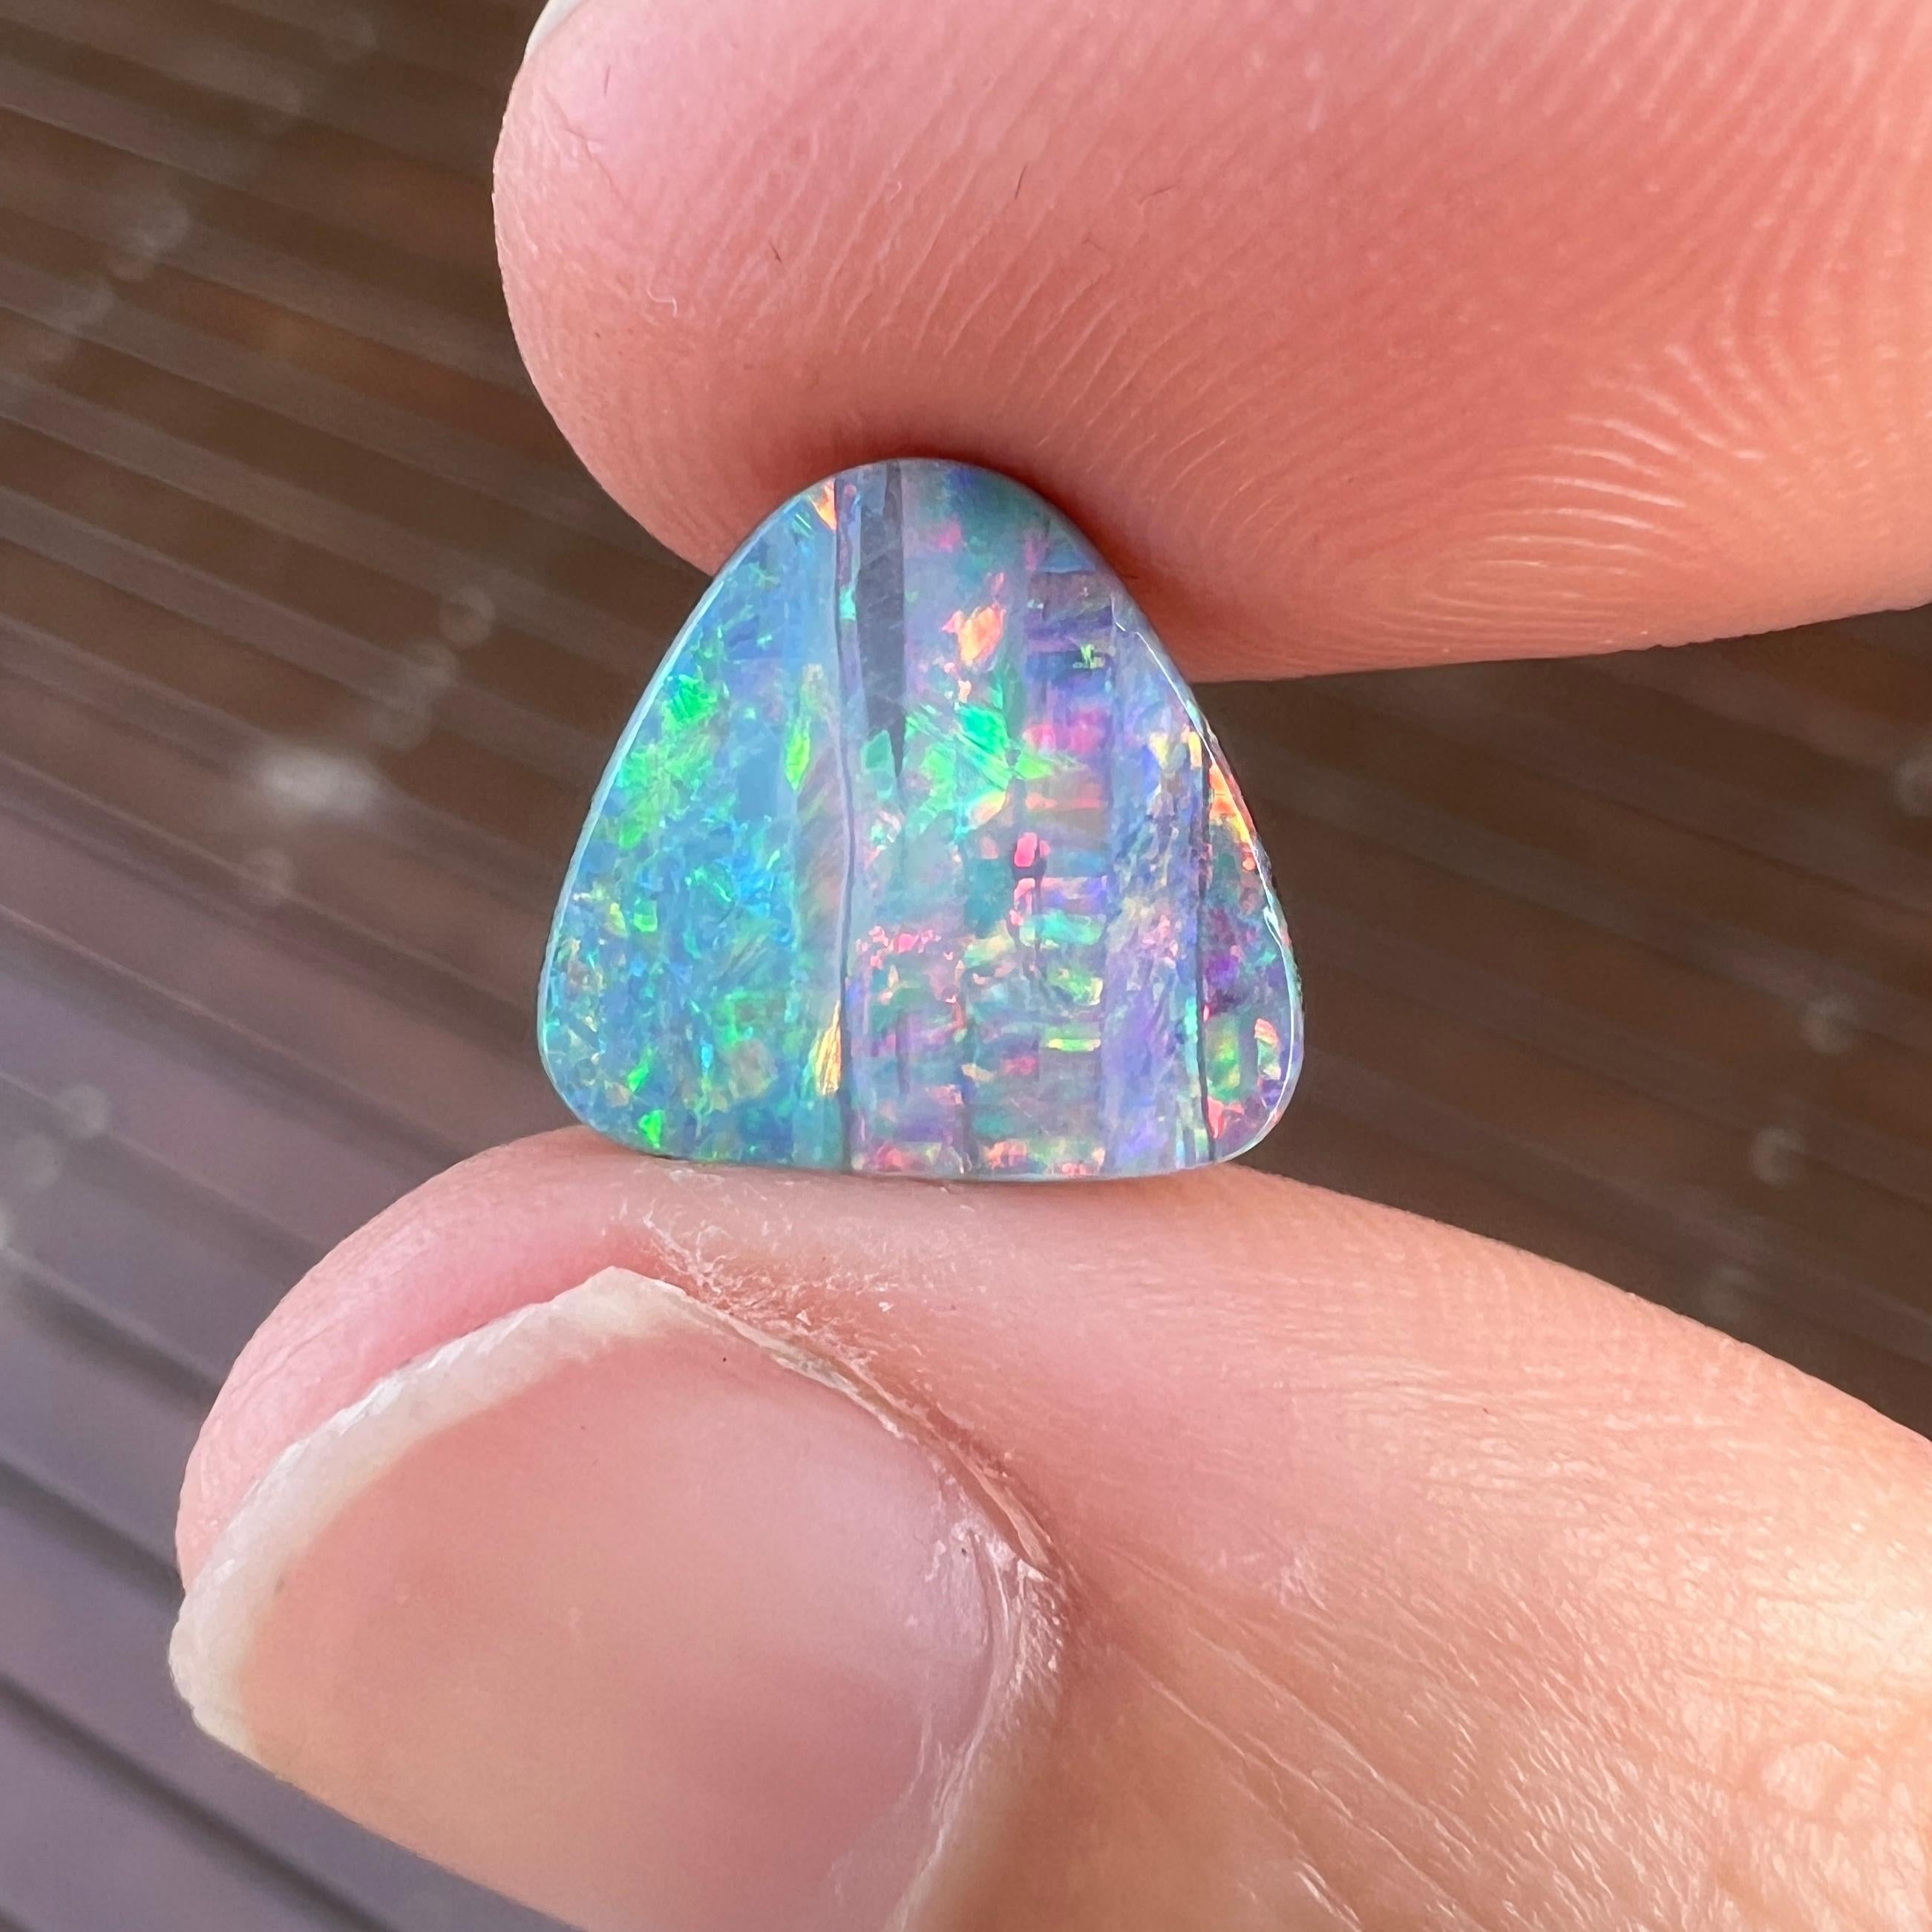 This gorgeous 2.85 Ct Australian boulder opal was mined by Sue Cooper at her Yaraka opal mine in western Queensland, Australia in 2022. Sue processed the rough opal herself and cut into a triangle shape with soft corners shape. We especially love